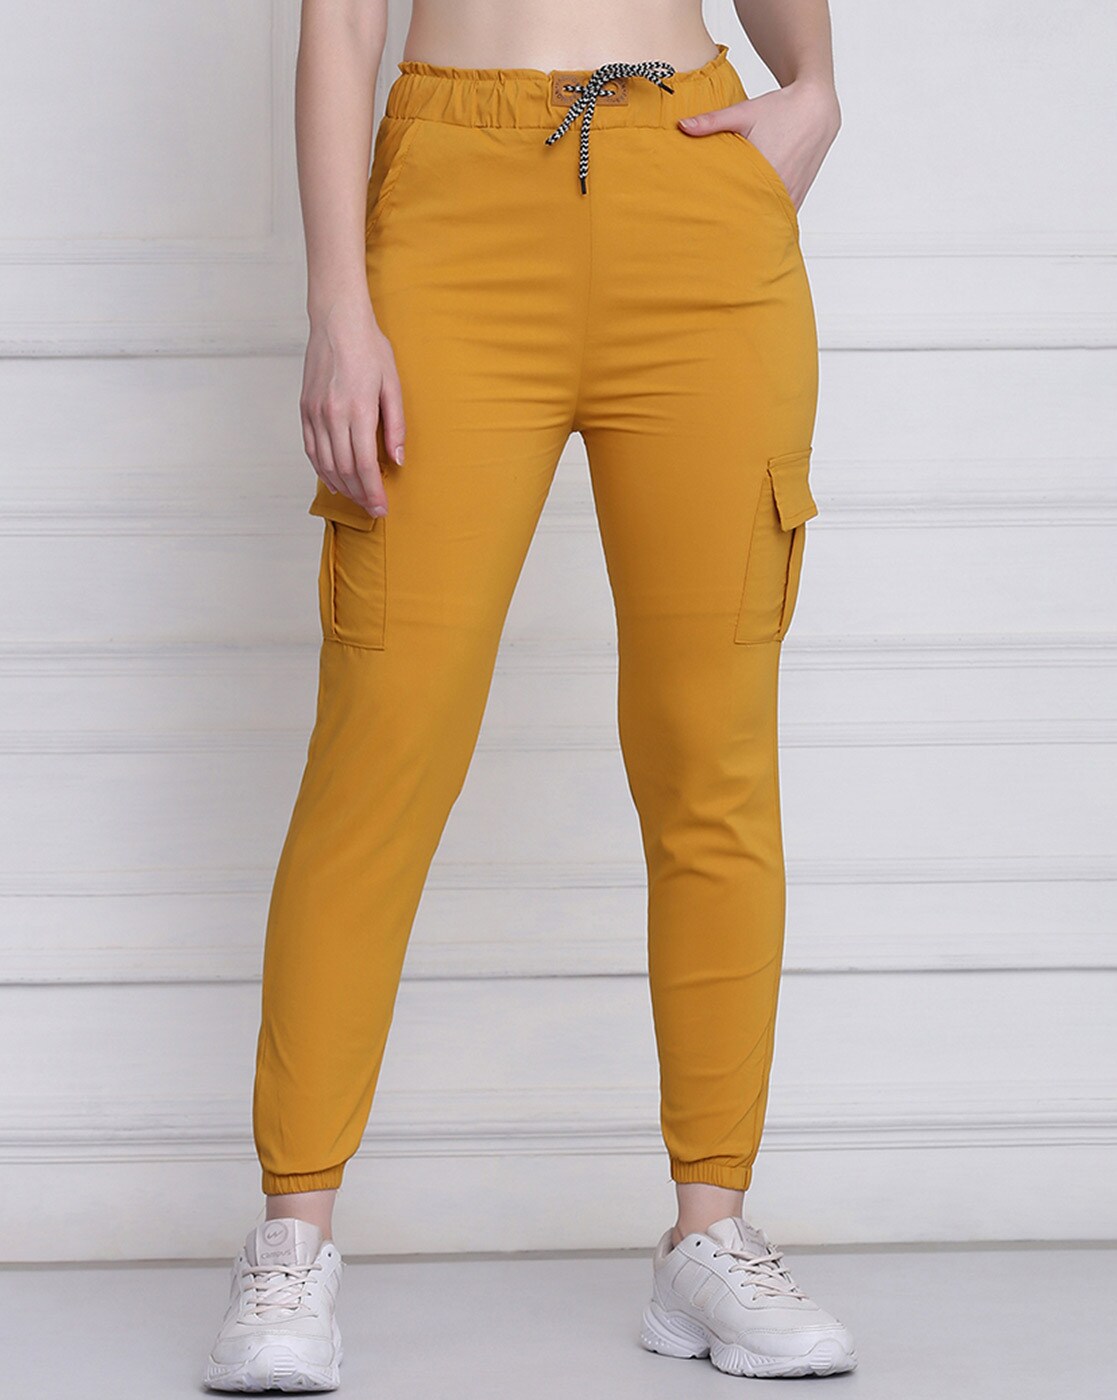 Yellow women cargo with 6 pockets Trousers  Pants febric export qly better  use with t